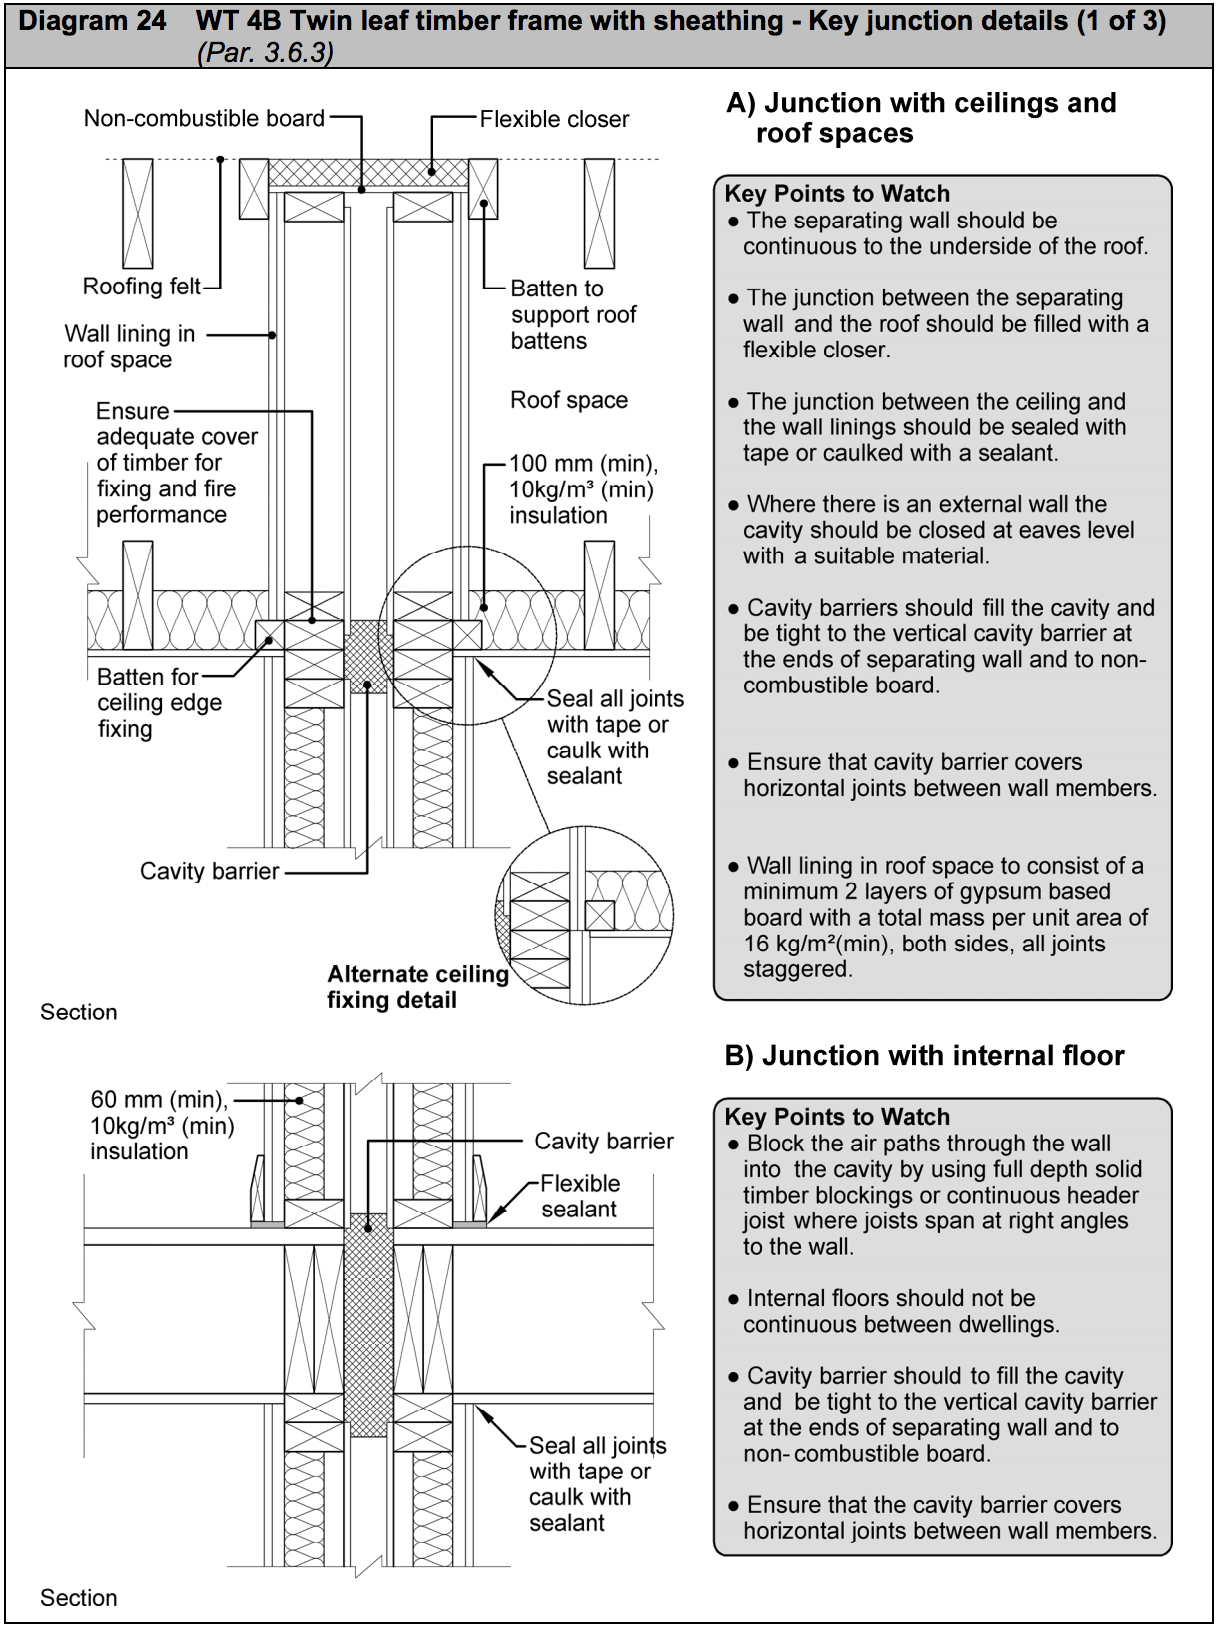 Diagram HE24 - WT 4B Twin leaf timber frame without sheathing - key junction details (1 of 3) - Extract from TGD E